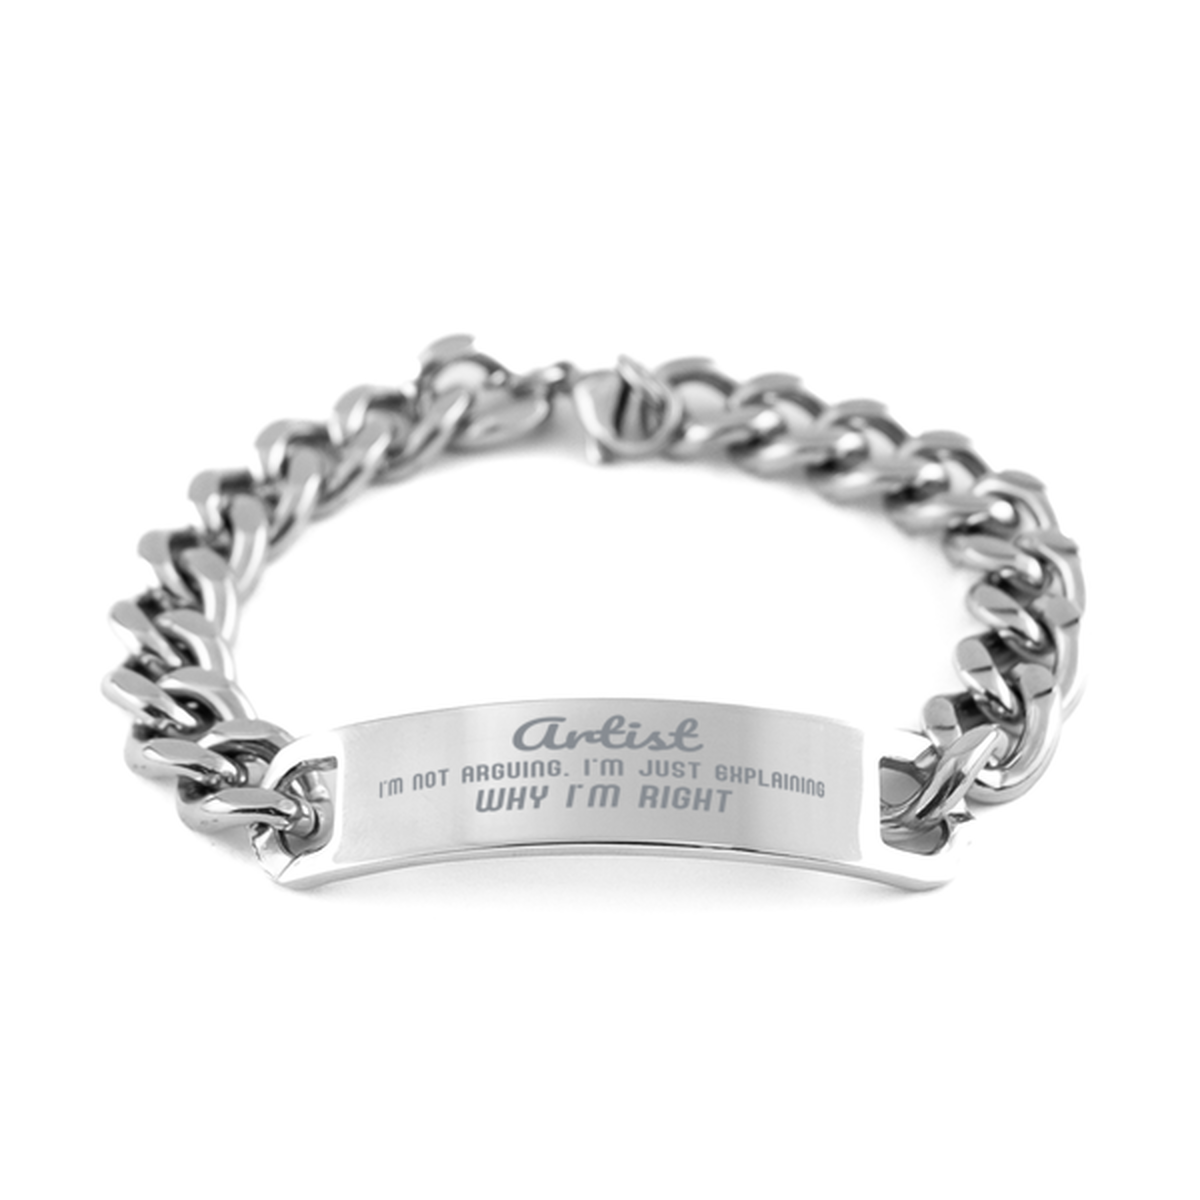 Artist I'm not Arguing. I'm Just Explaining Why I'm RIGHT Cuban Chain Stainless Steel Bracelet, Graduation Birthday Christmas Artist Gifts For Artist Funny Saying Quote Present for Men Women Coworker